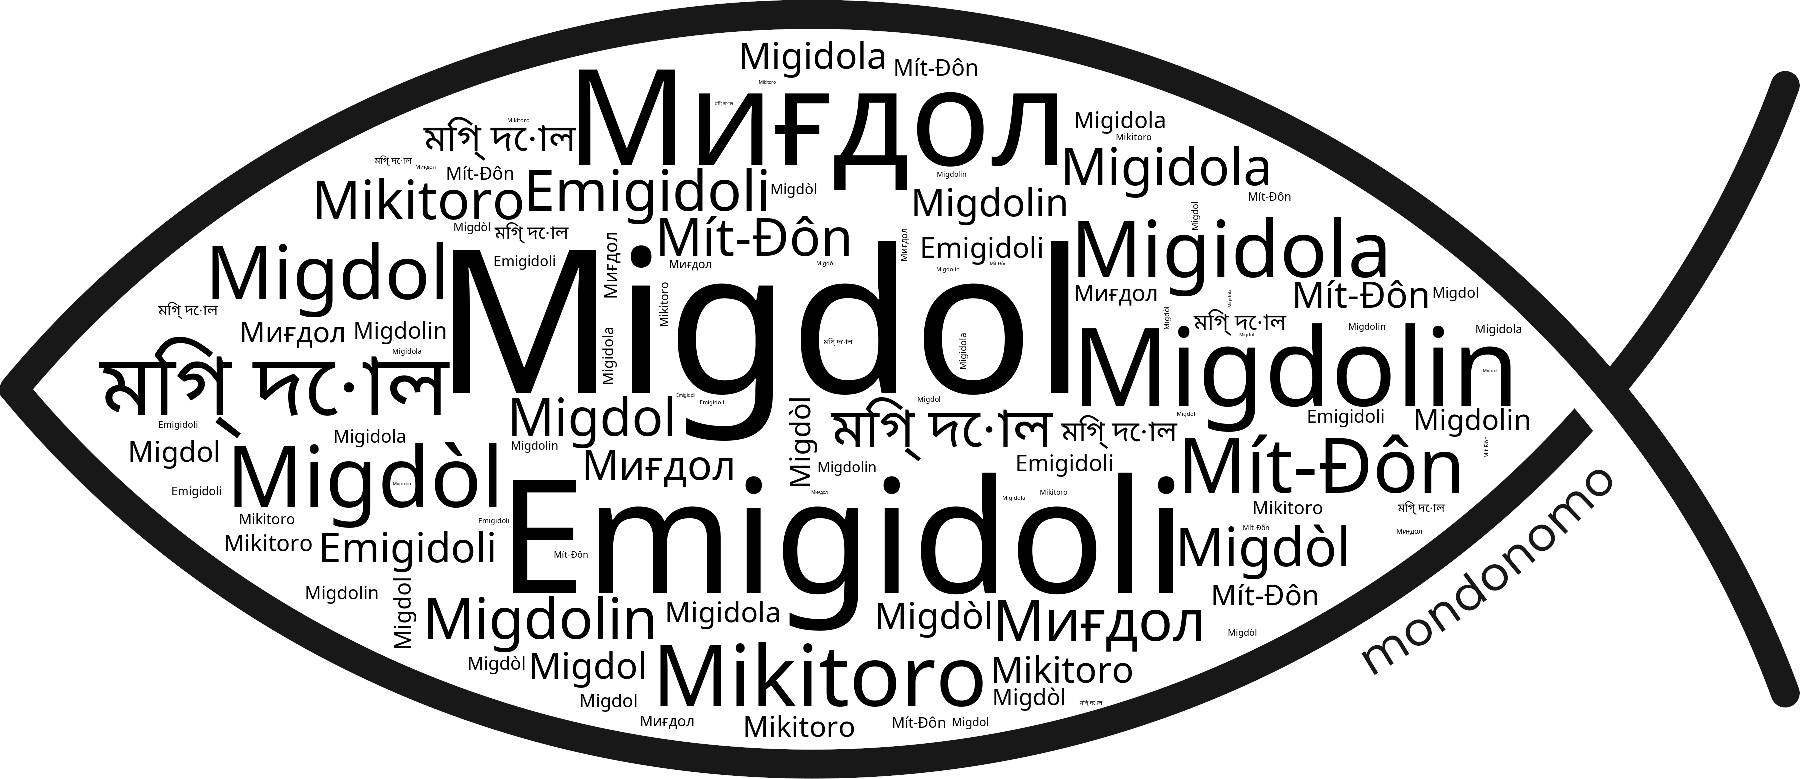 Name Migdol in the world's Bibles